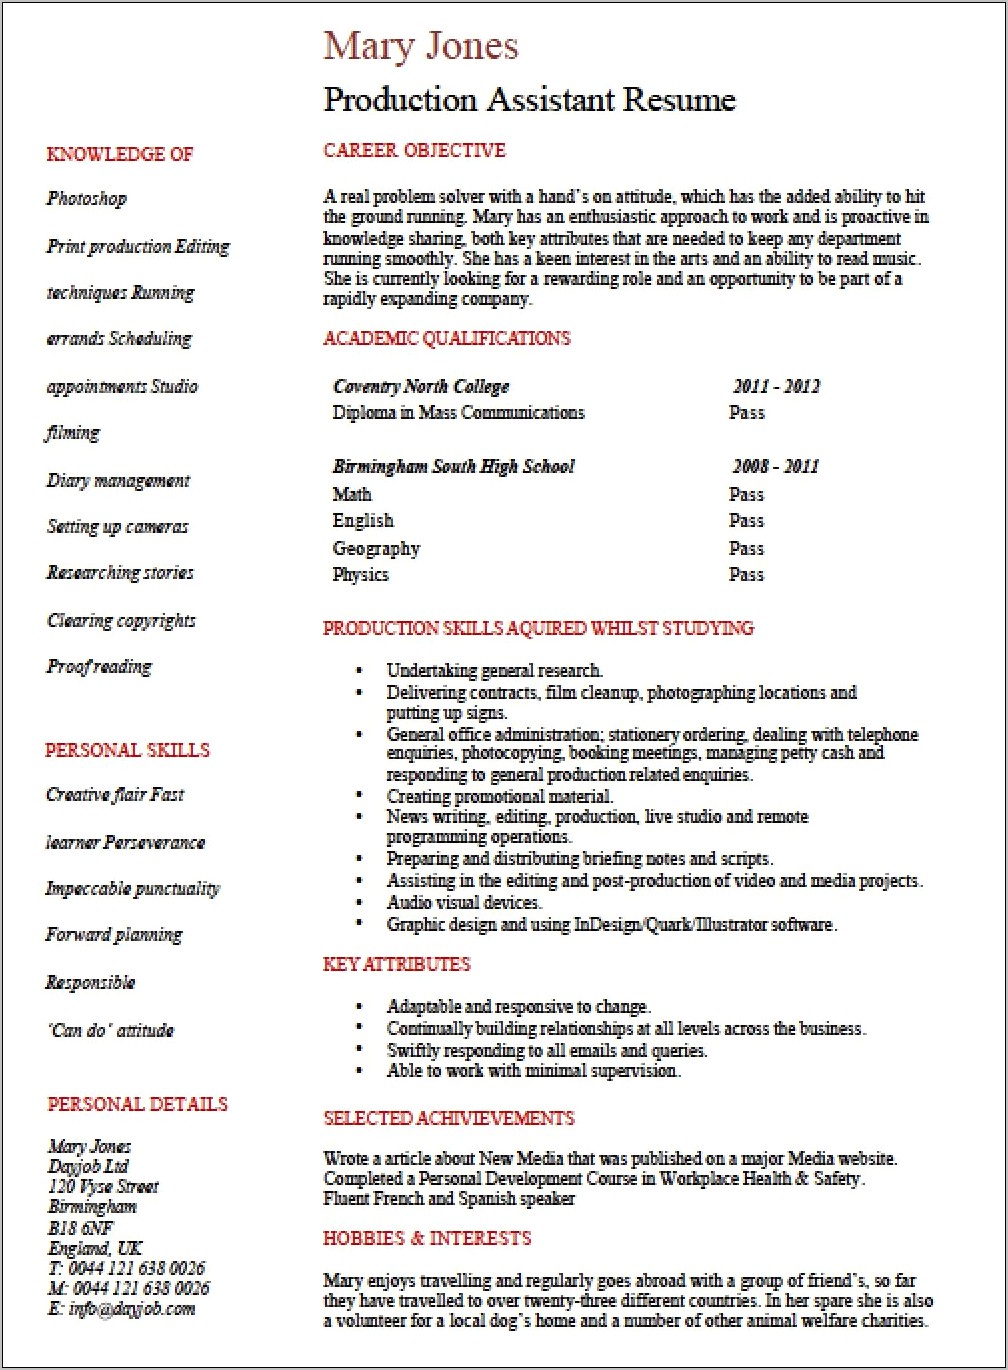 Resume Objective Statement Examples Pdf